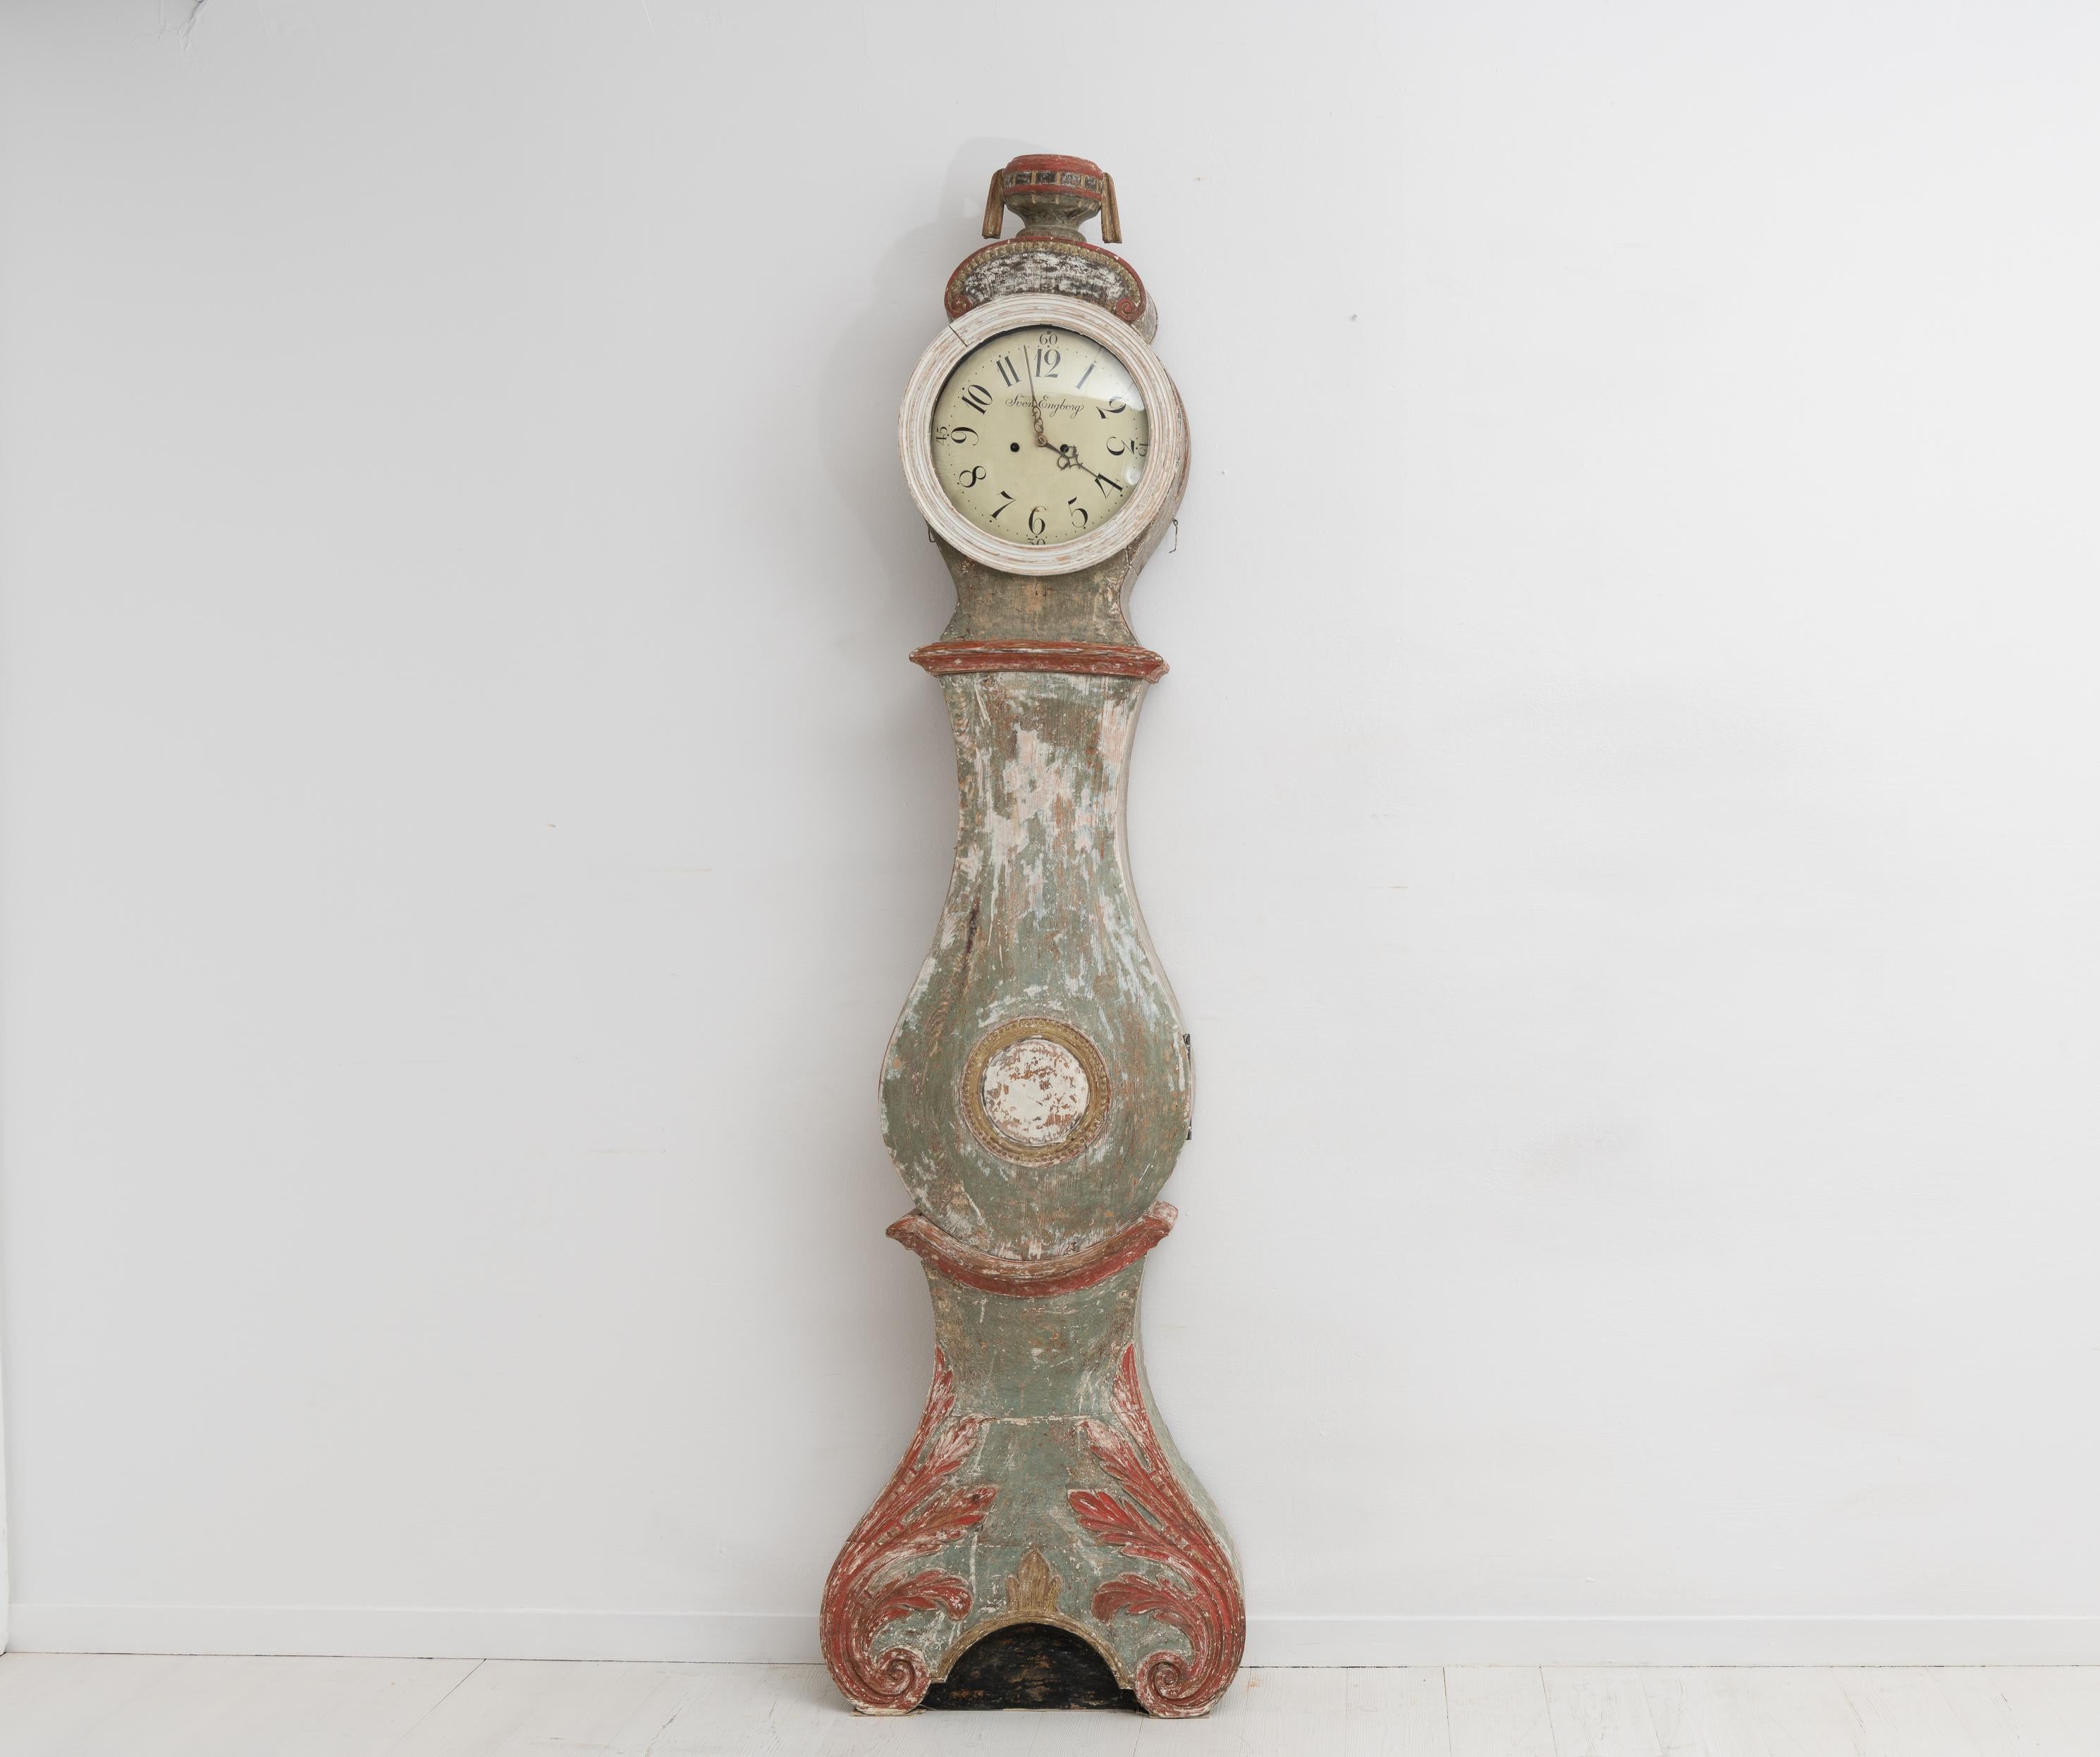 Southern Swedish long case clock from the early 1800s in rococo style. The clock is hand-made from pine with original hand-craved decor. Dry scraped to traces of the original green, red and gold paint. The curved shape typical for the rococo period